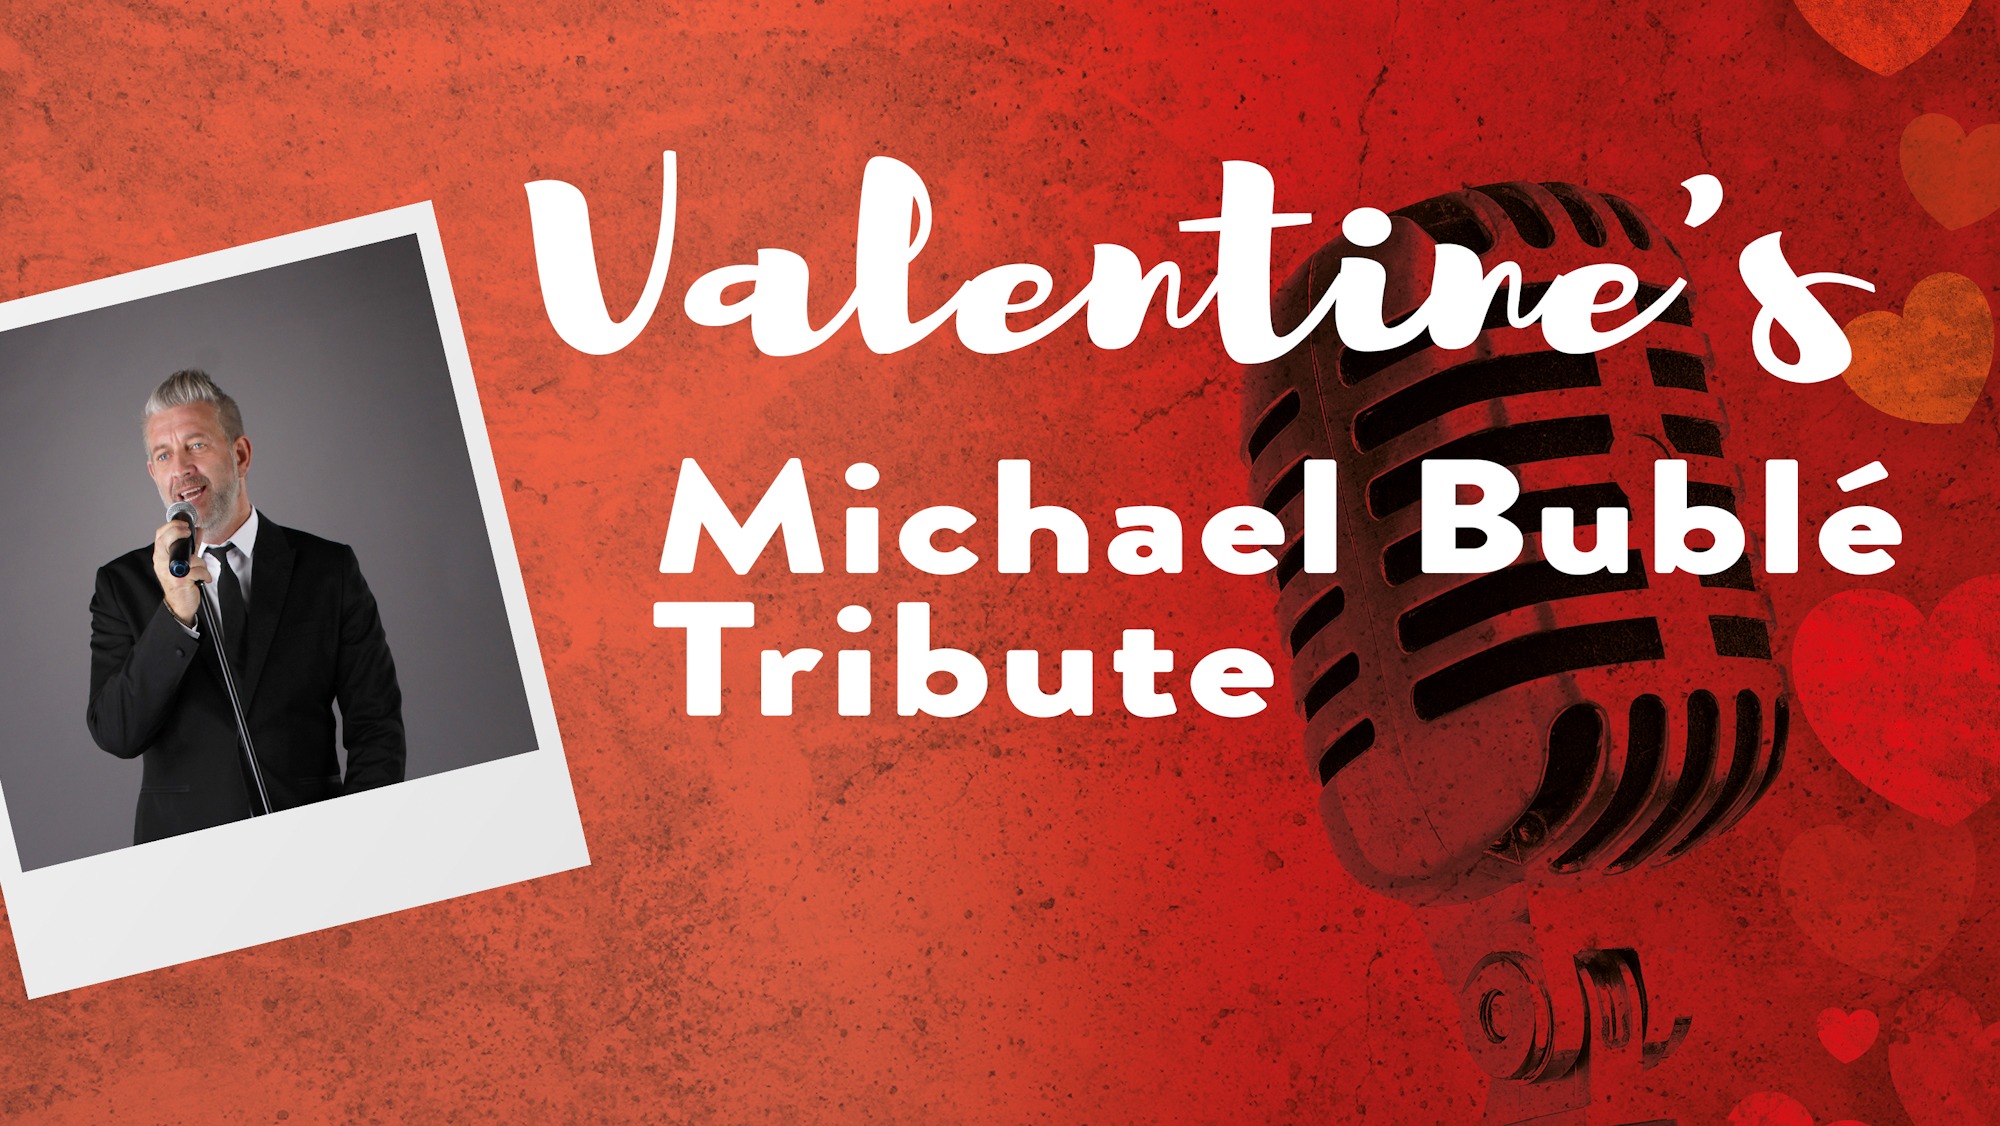 ﻿Be romanced on Bournemouth Pier by Valentine’s evening Michael Bublé tribute act